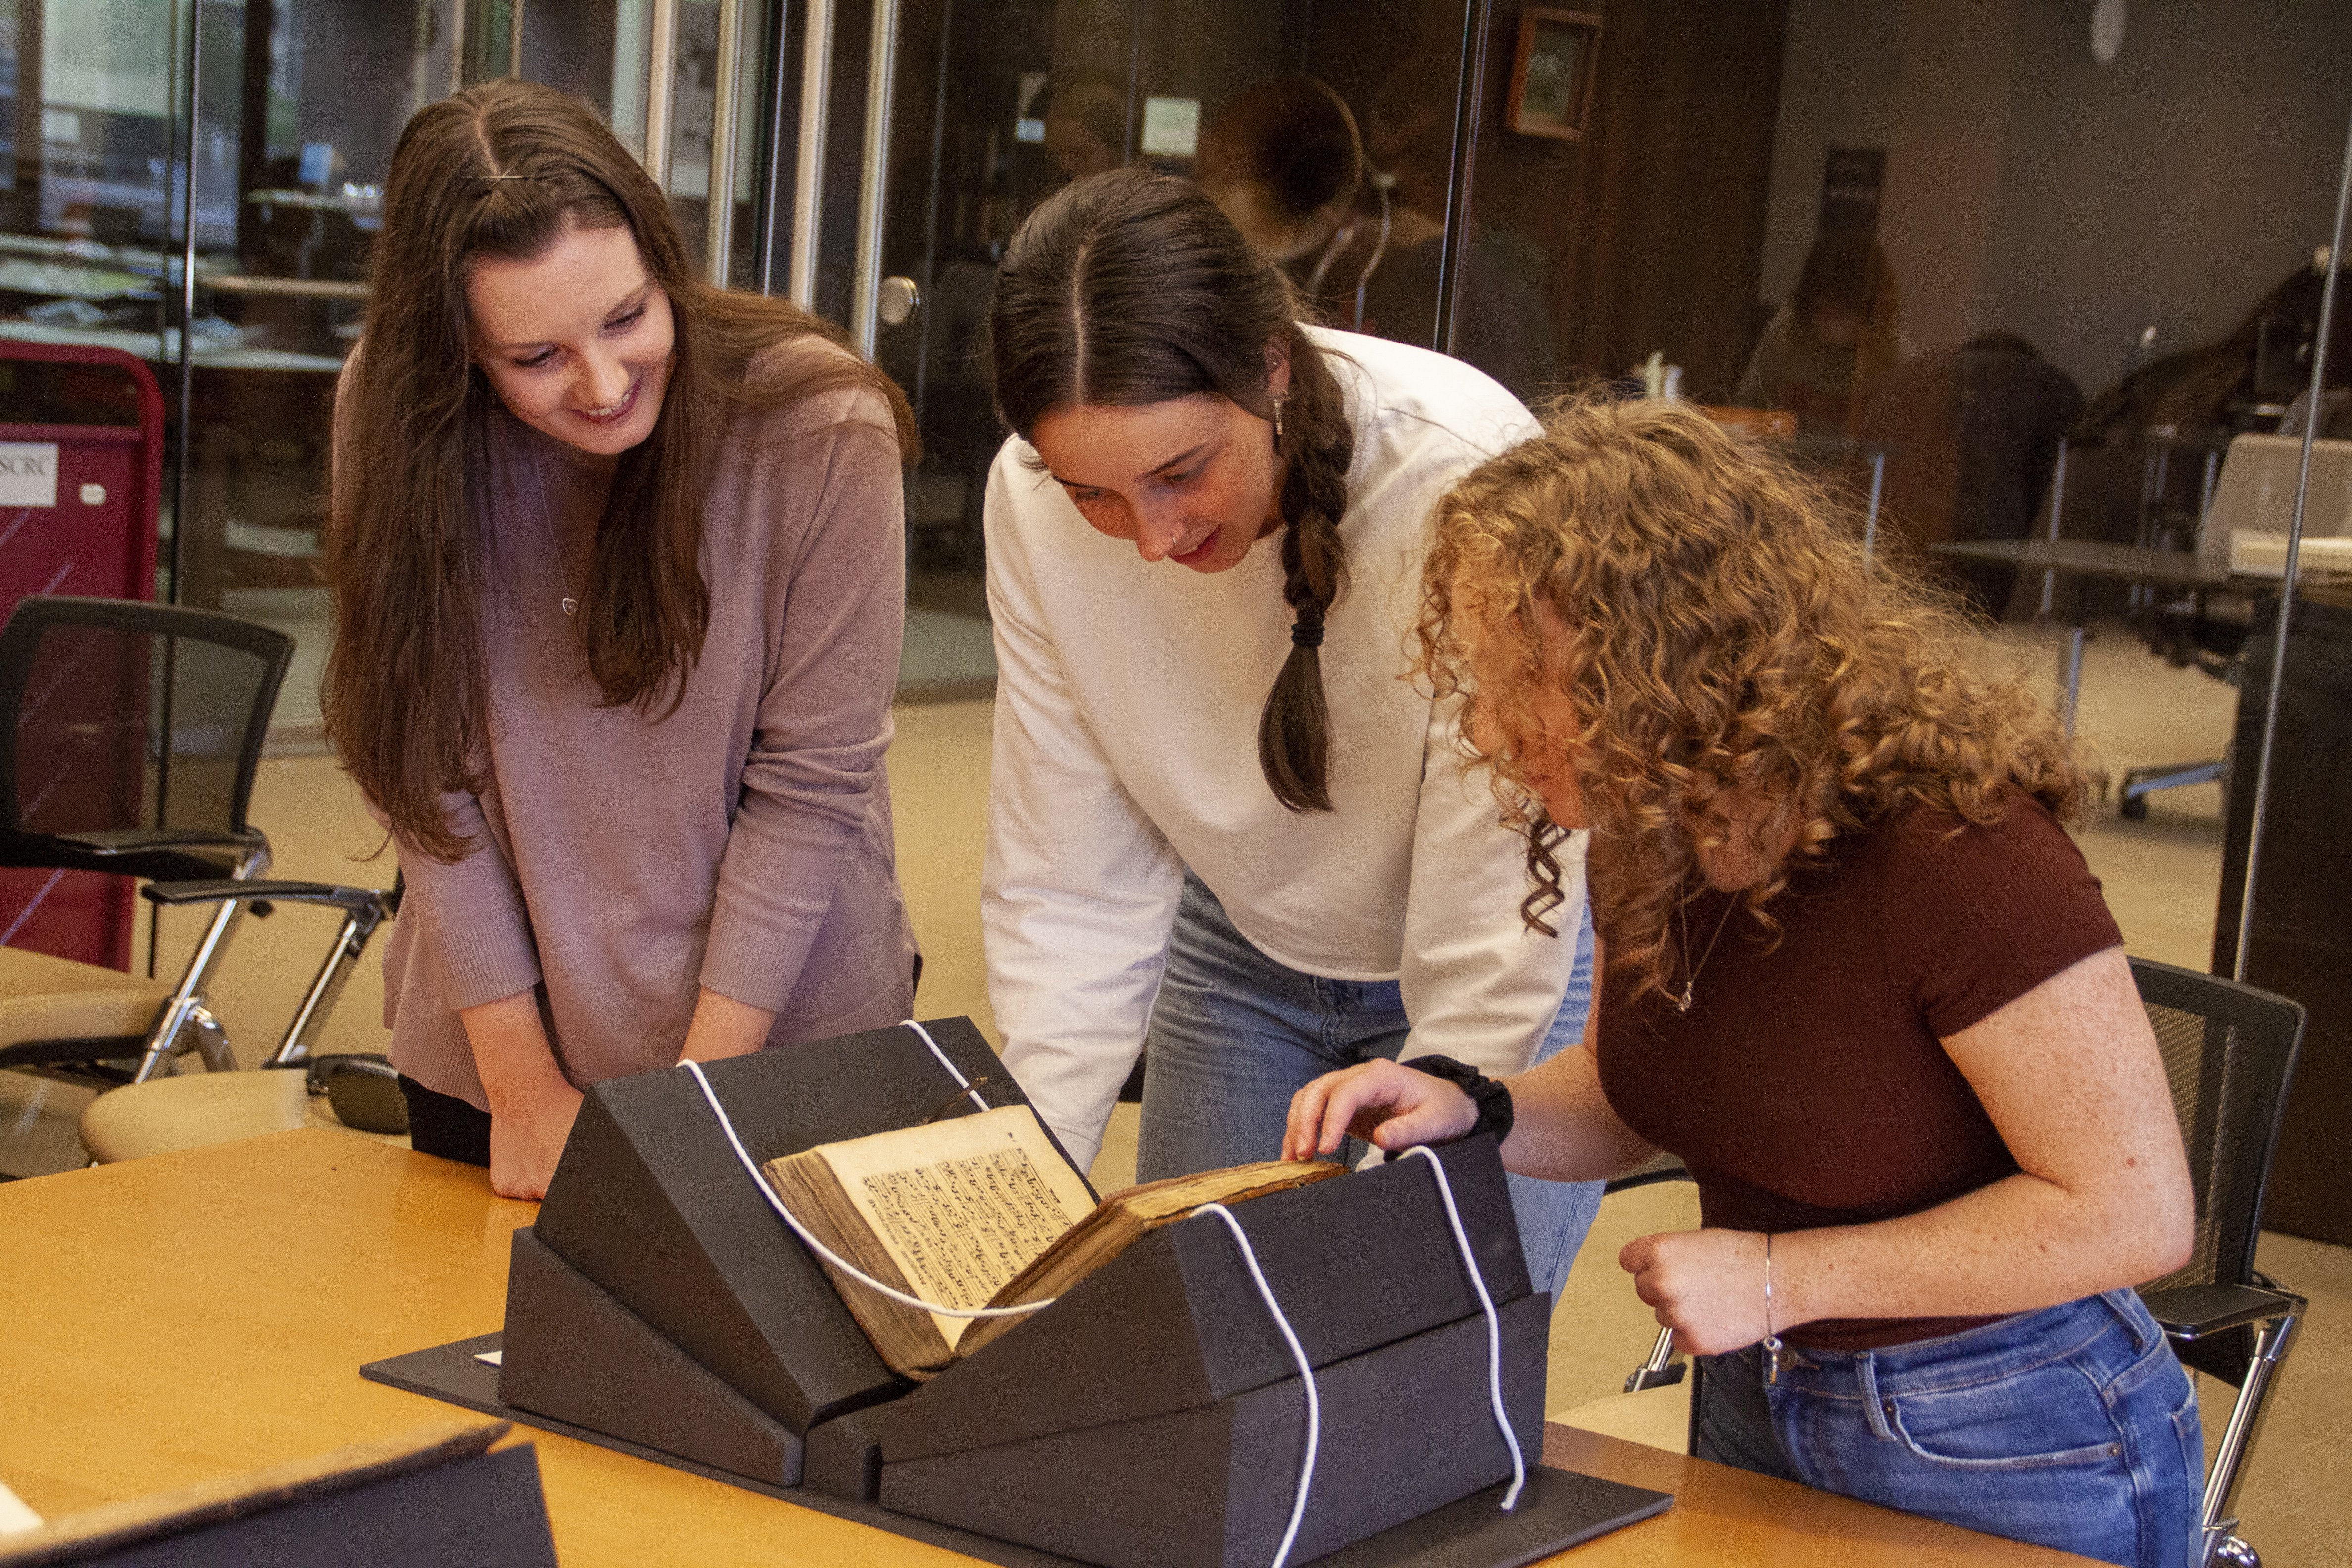 Students examine a book